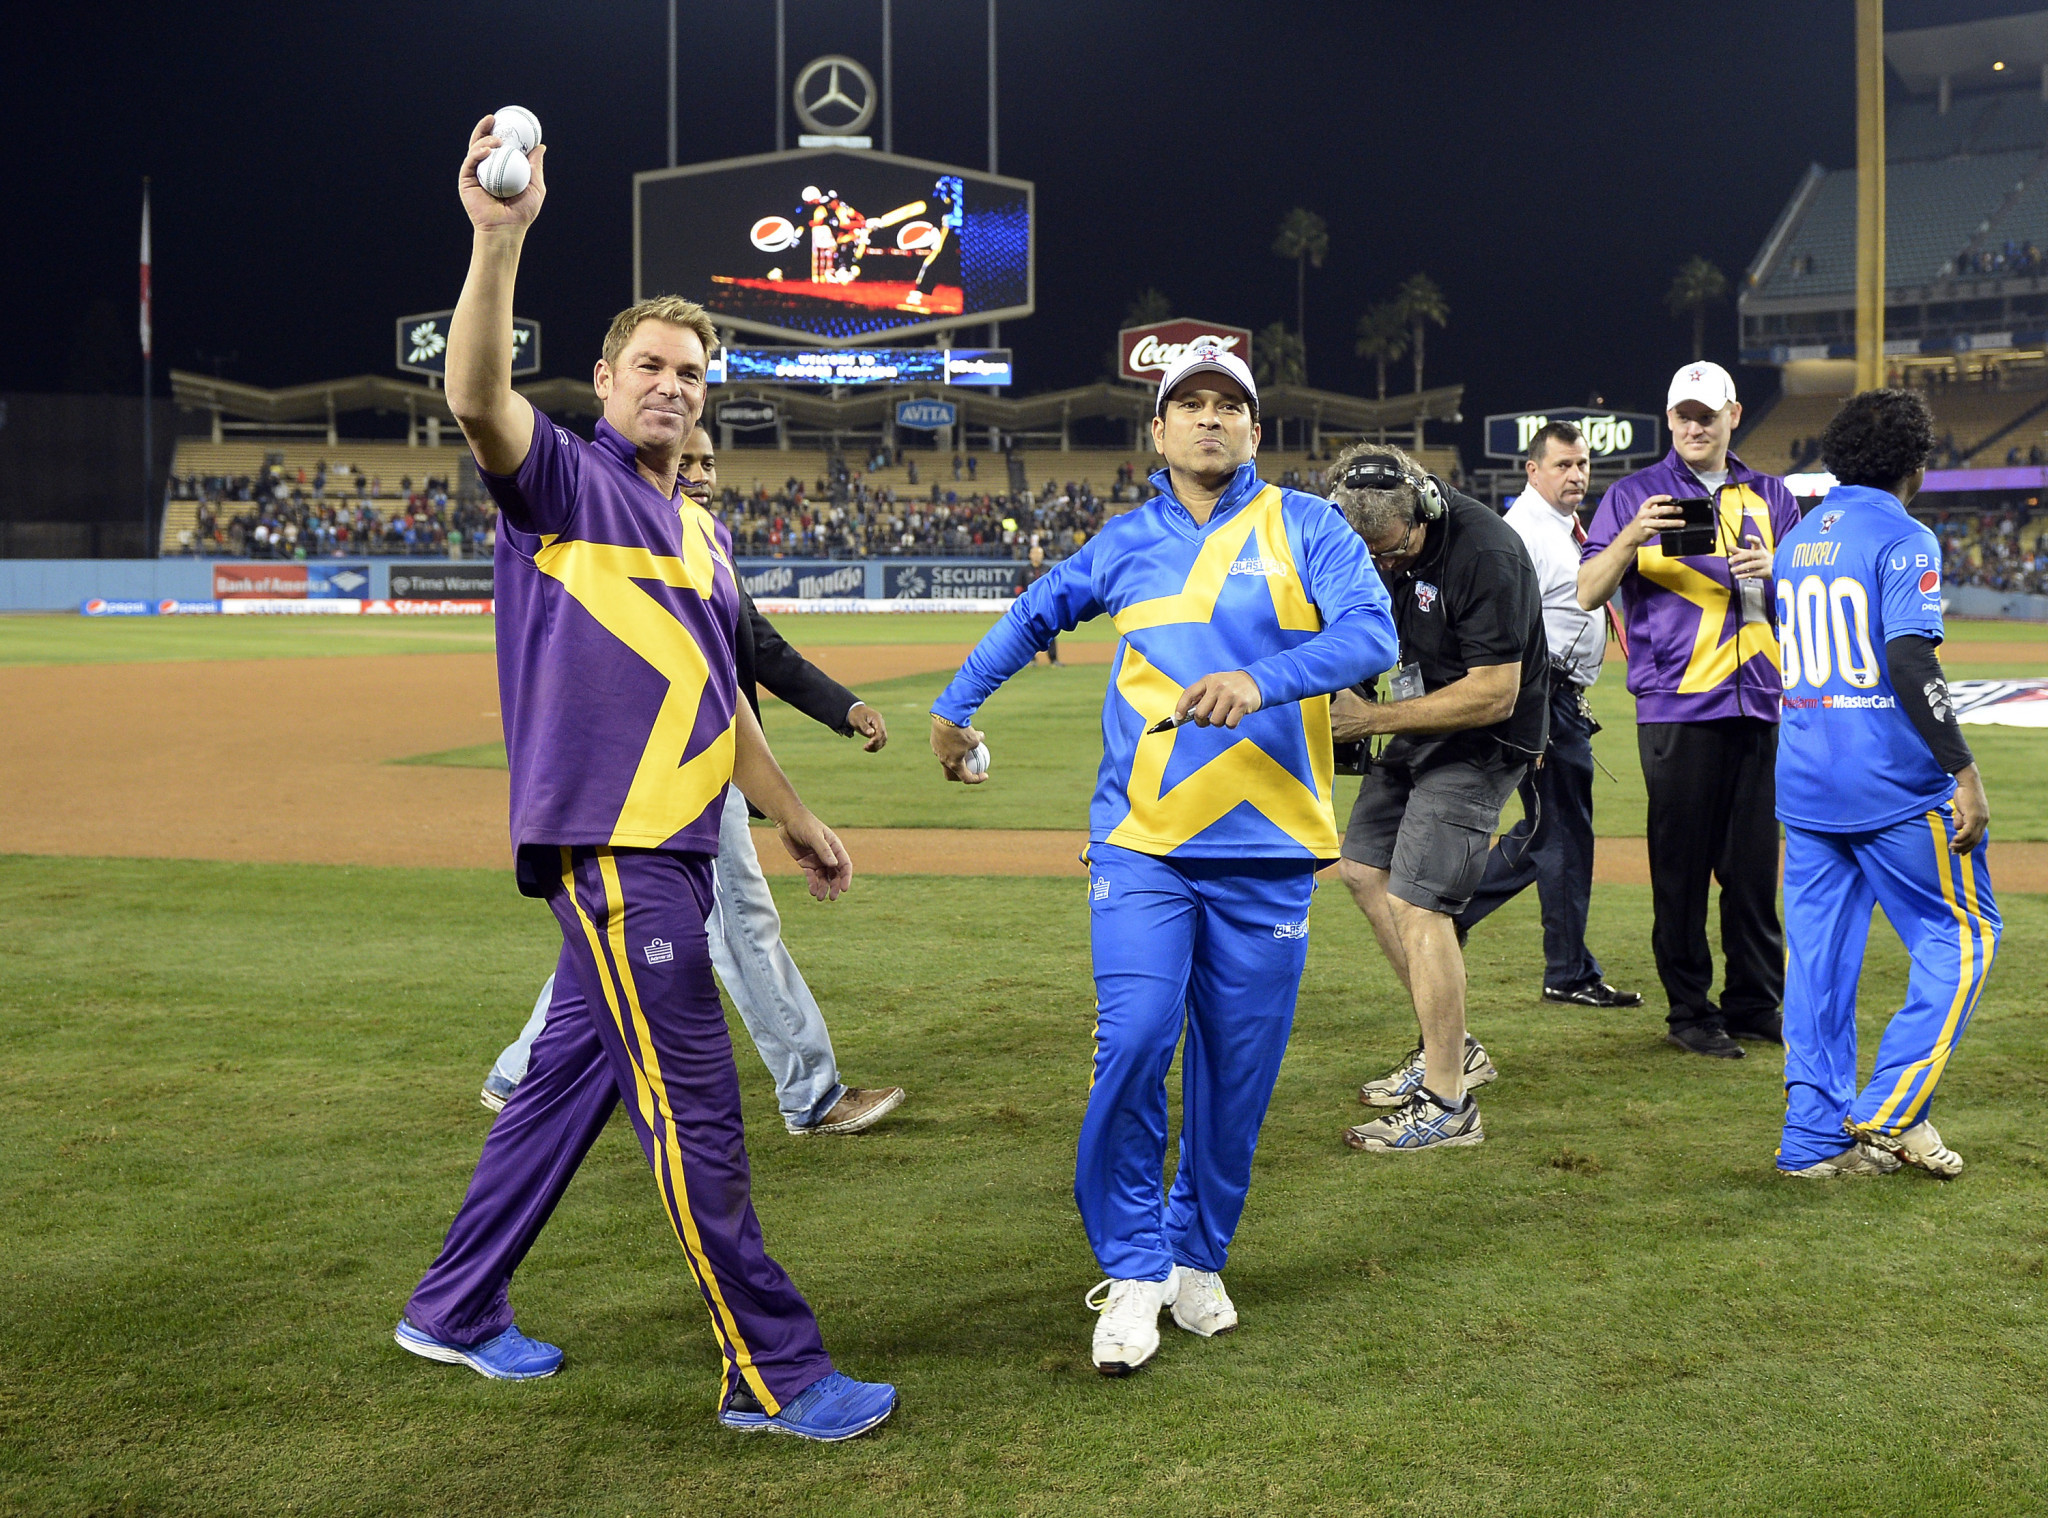 In 2015 the late Shane Warne joined Sachin Tendulkar for an exhibition cricket match to promote the sport in the Los Angeles Dodgers stadium ©Getty Images